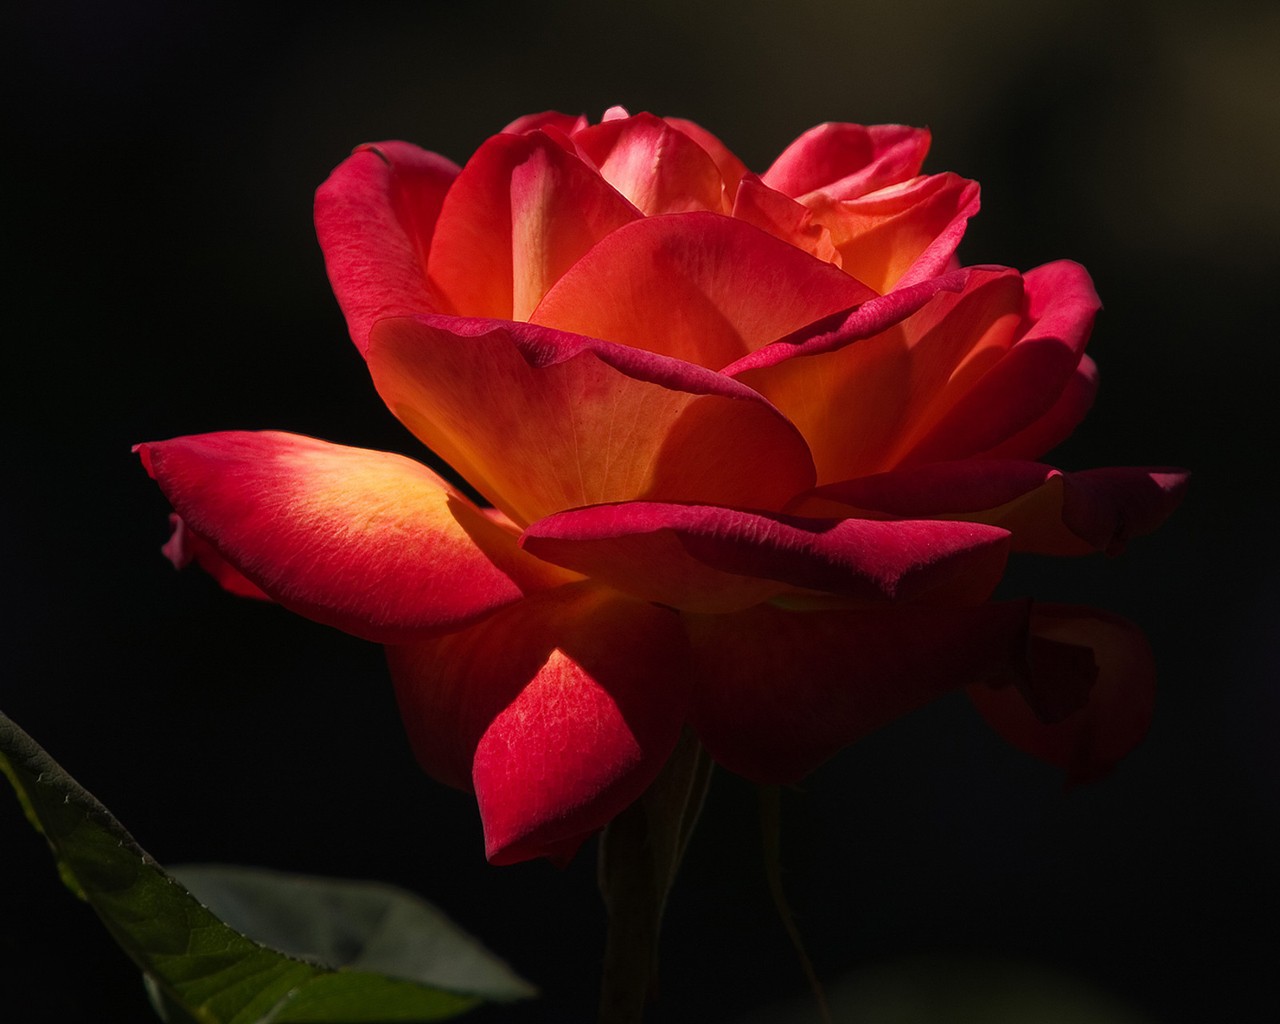 Red rose on a black background wallpapers and images